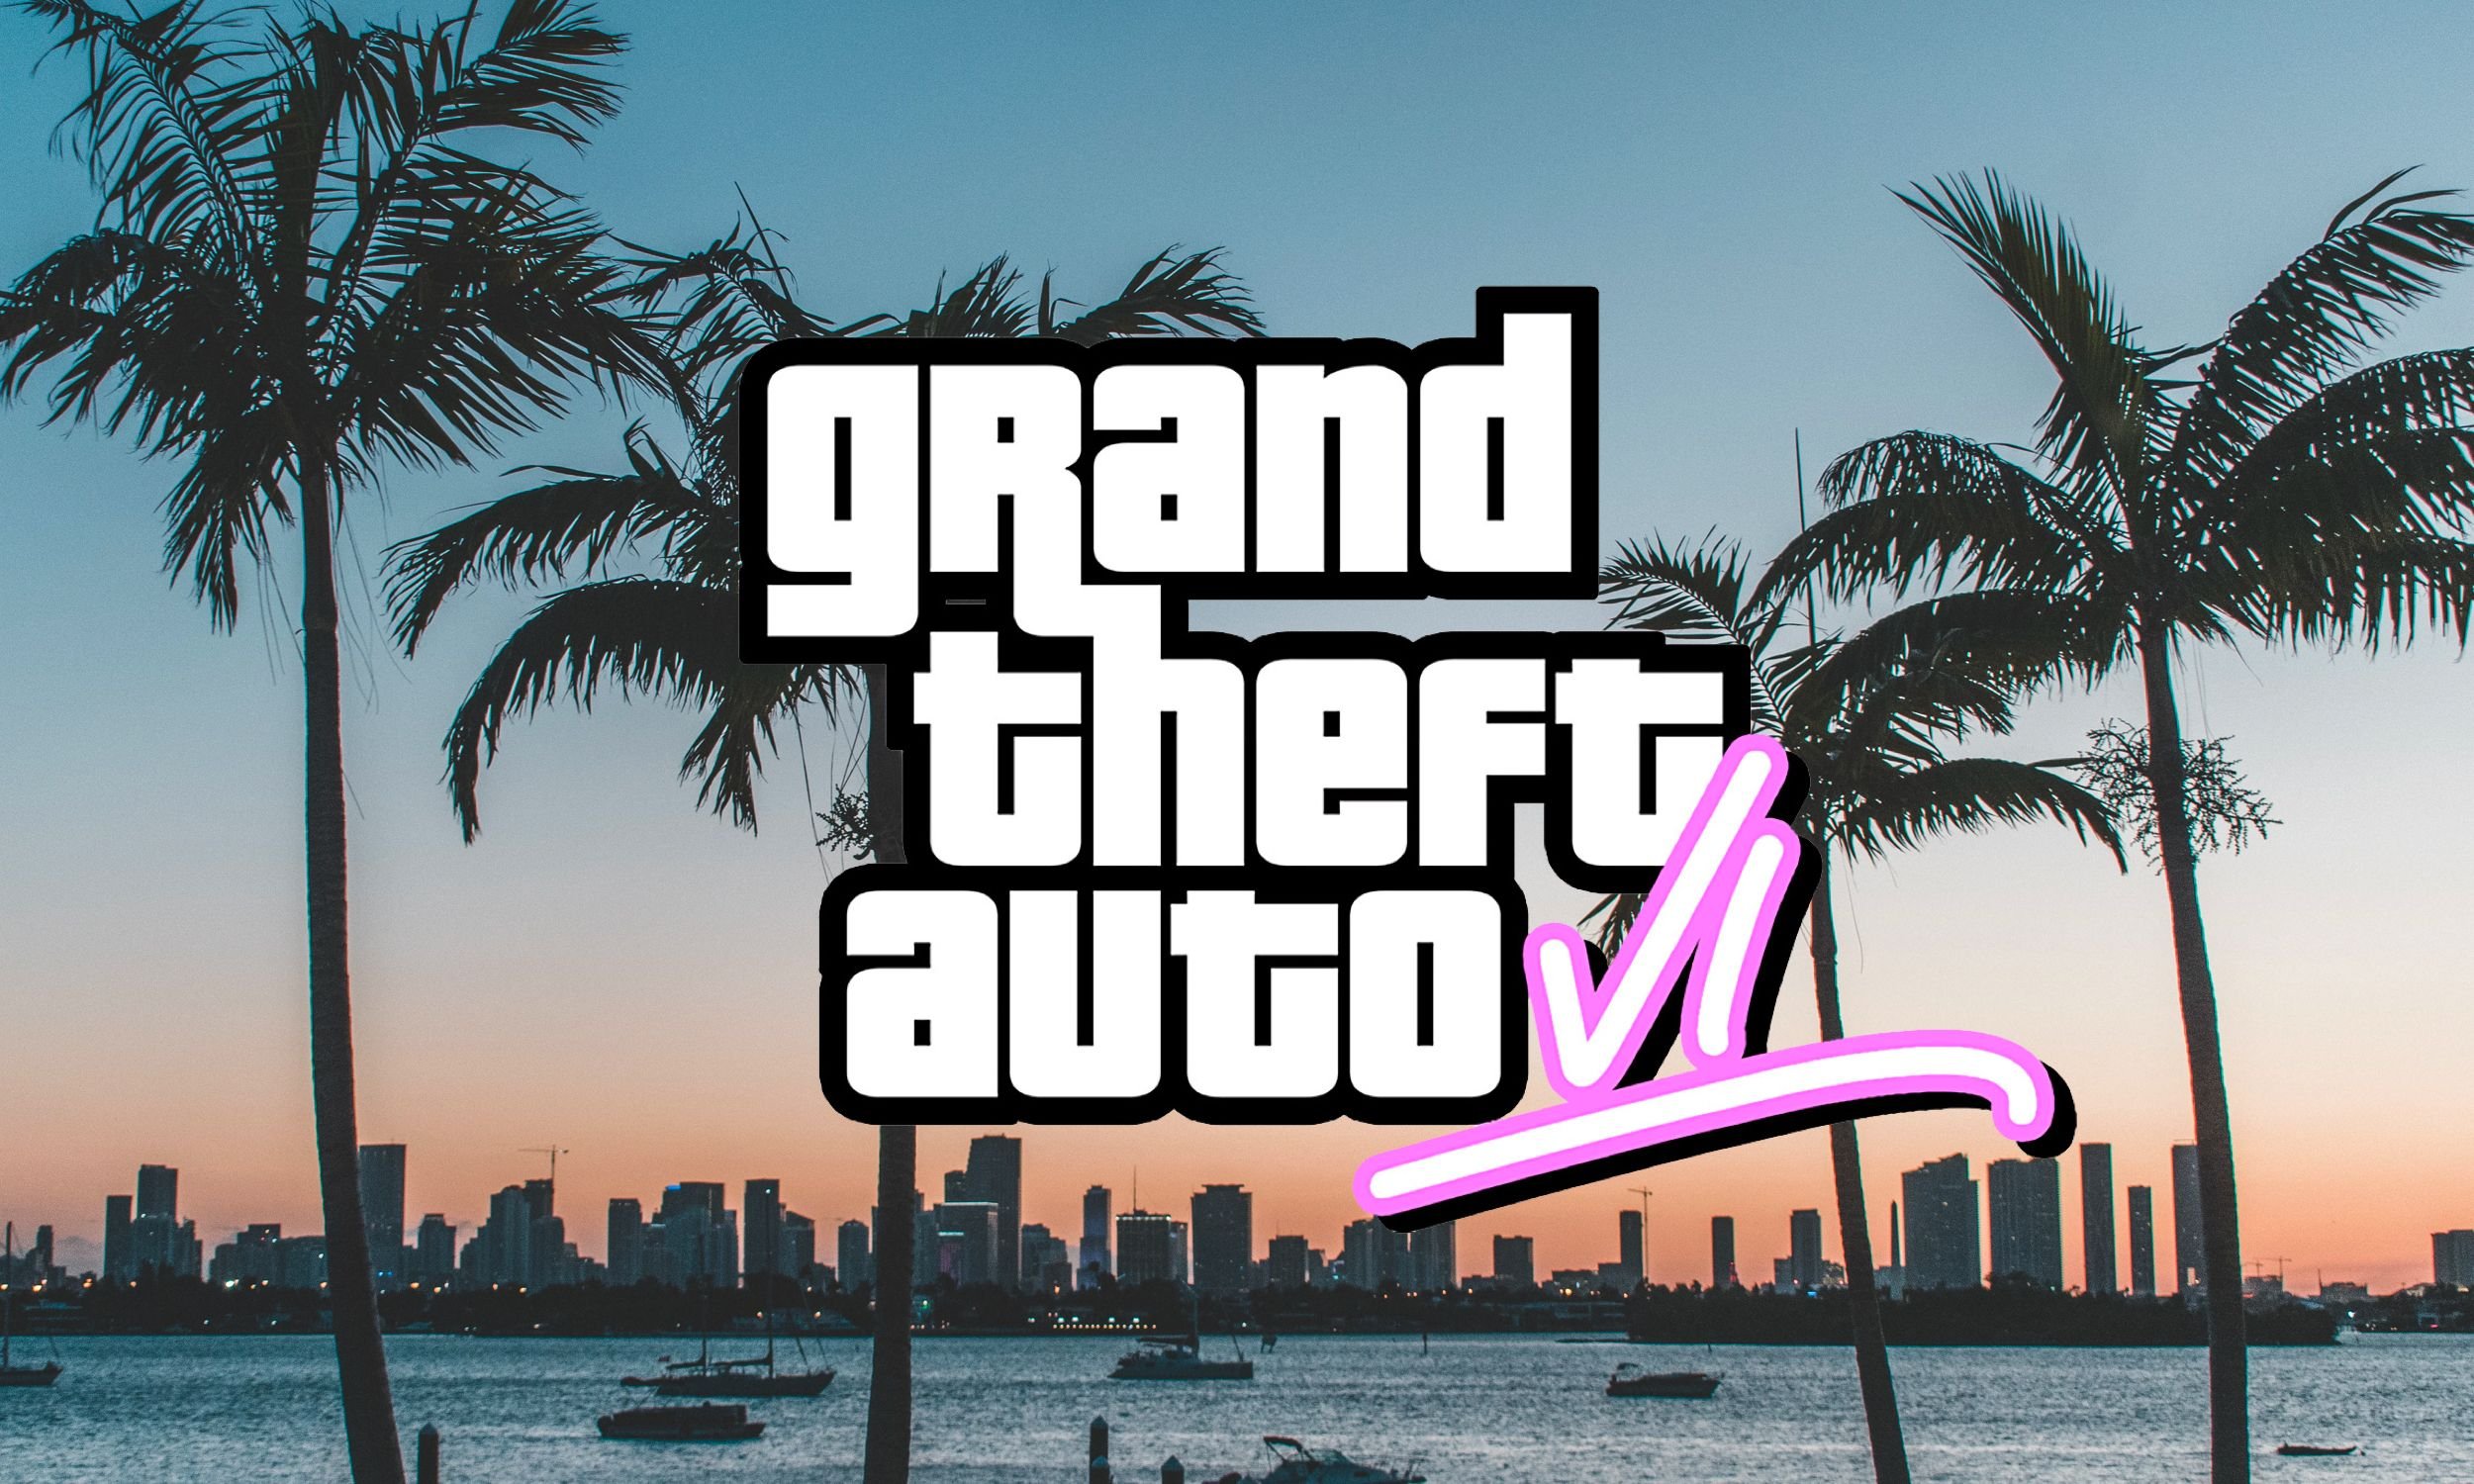 GTA 6 reportedly will be set in Vice City and will feature a female protagonist, scheduled to release between April 2023 - March 2024